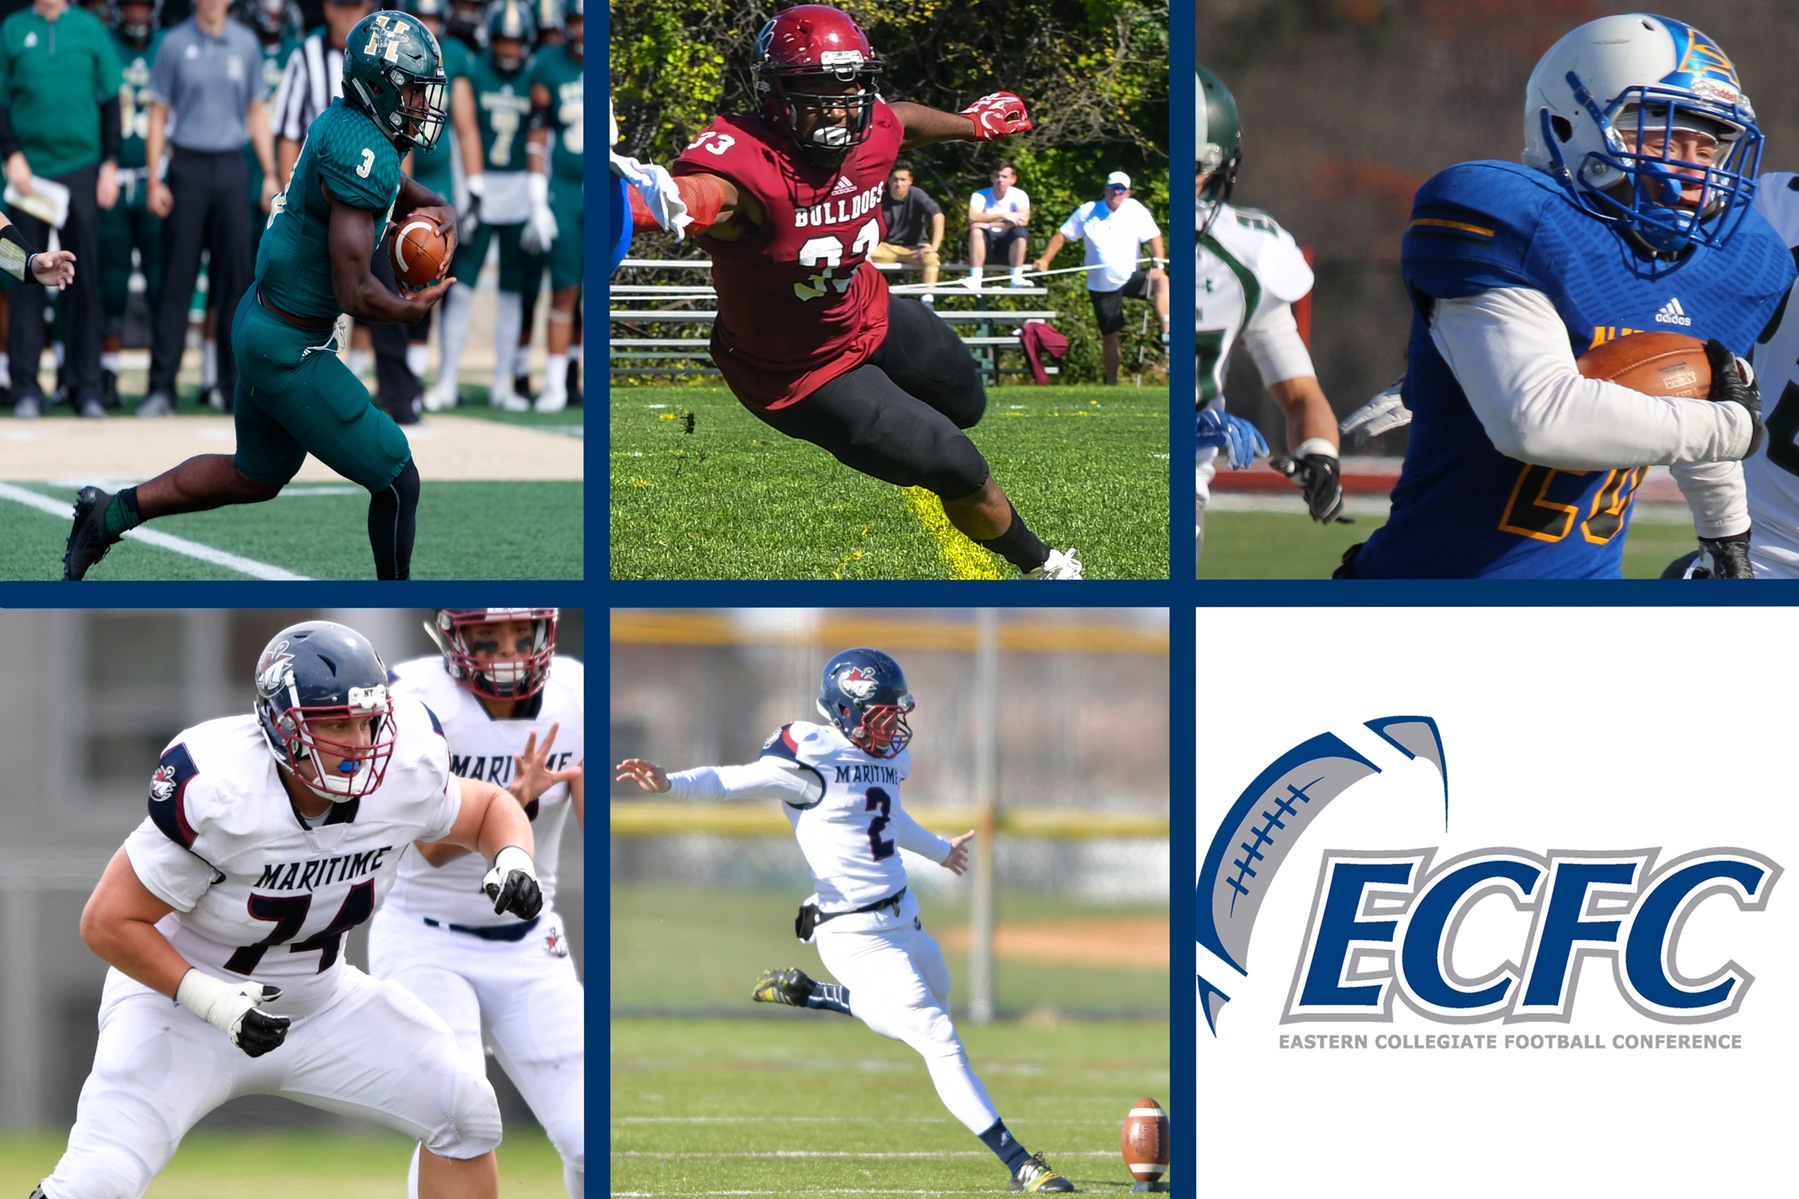 ECFC Announces 2017 All-Conference Teams